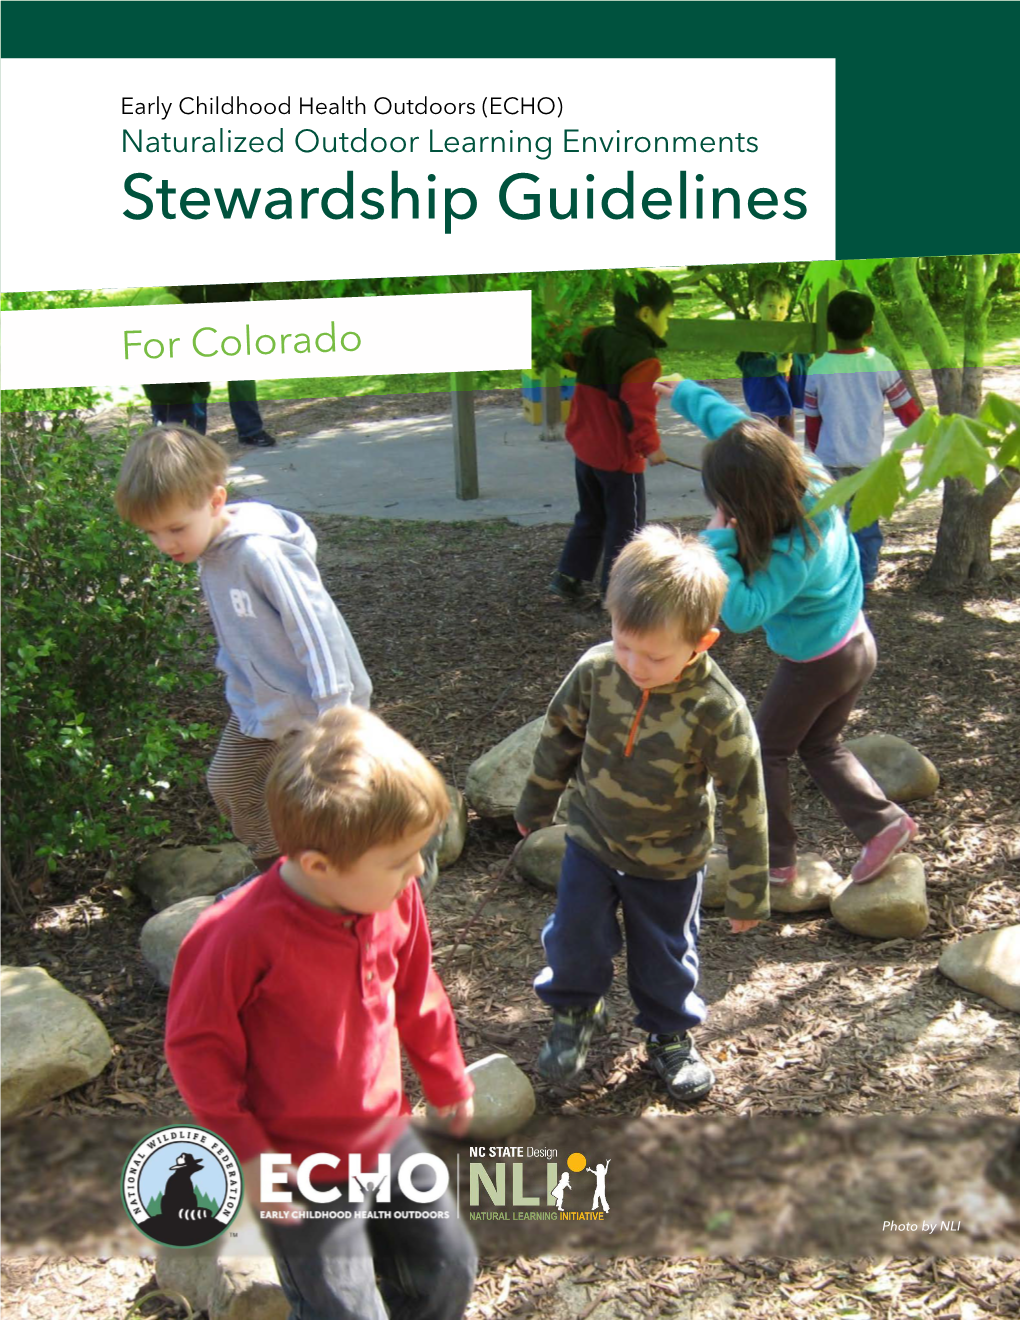 Naturalized Outdoor Learning Environment Stewardship Guidelines